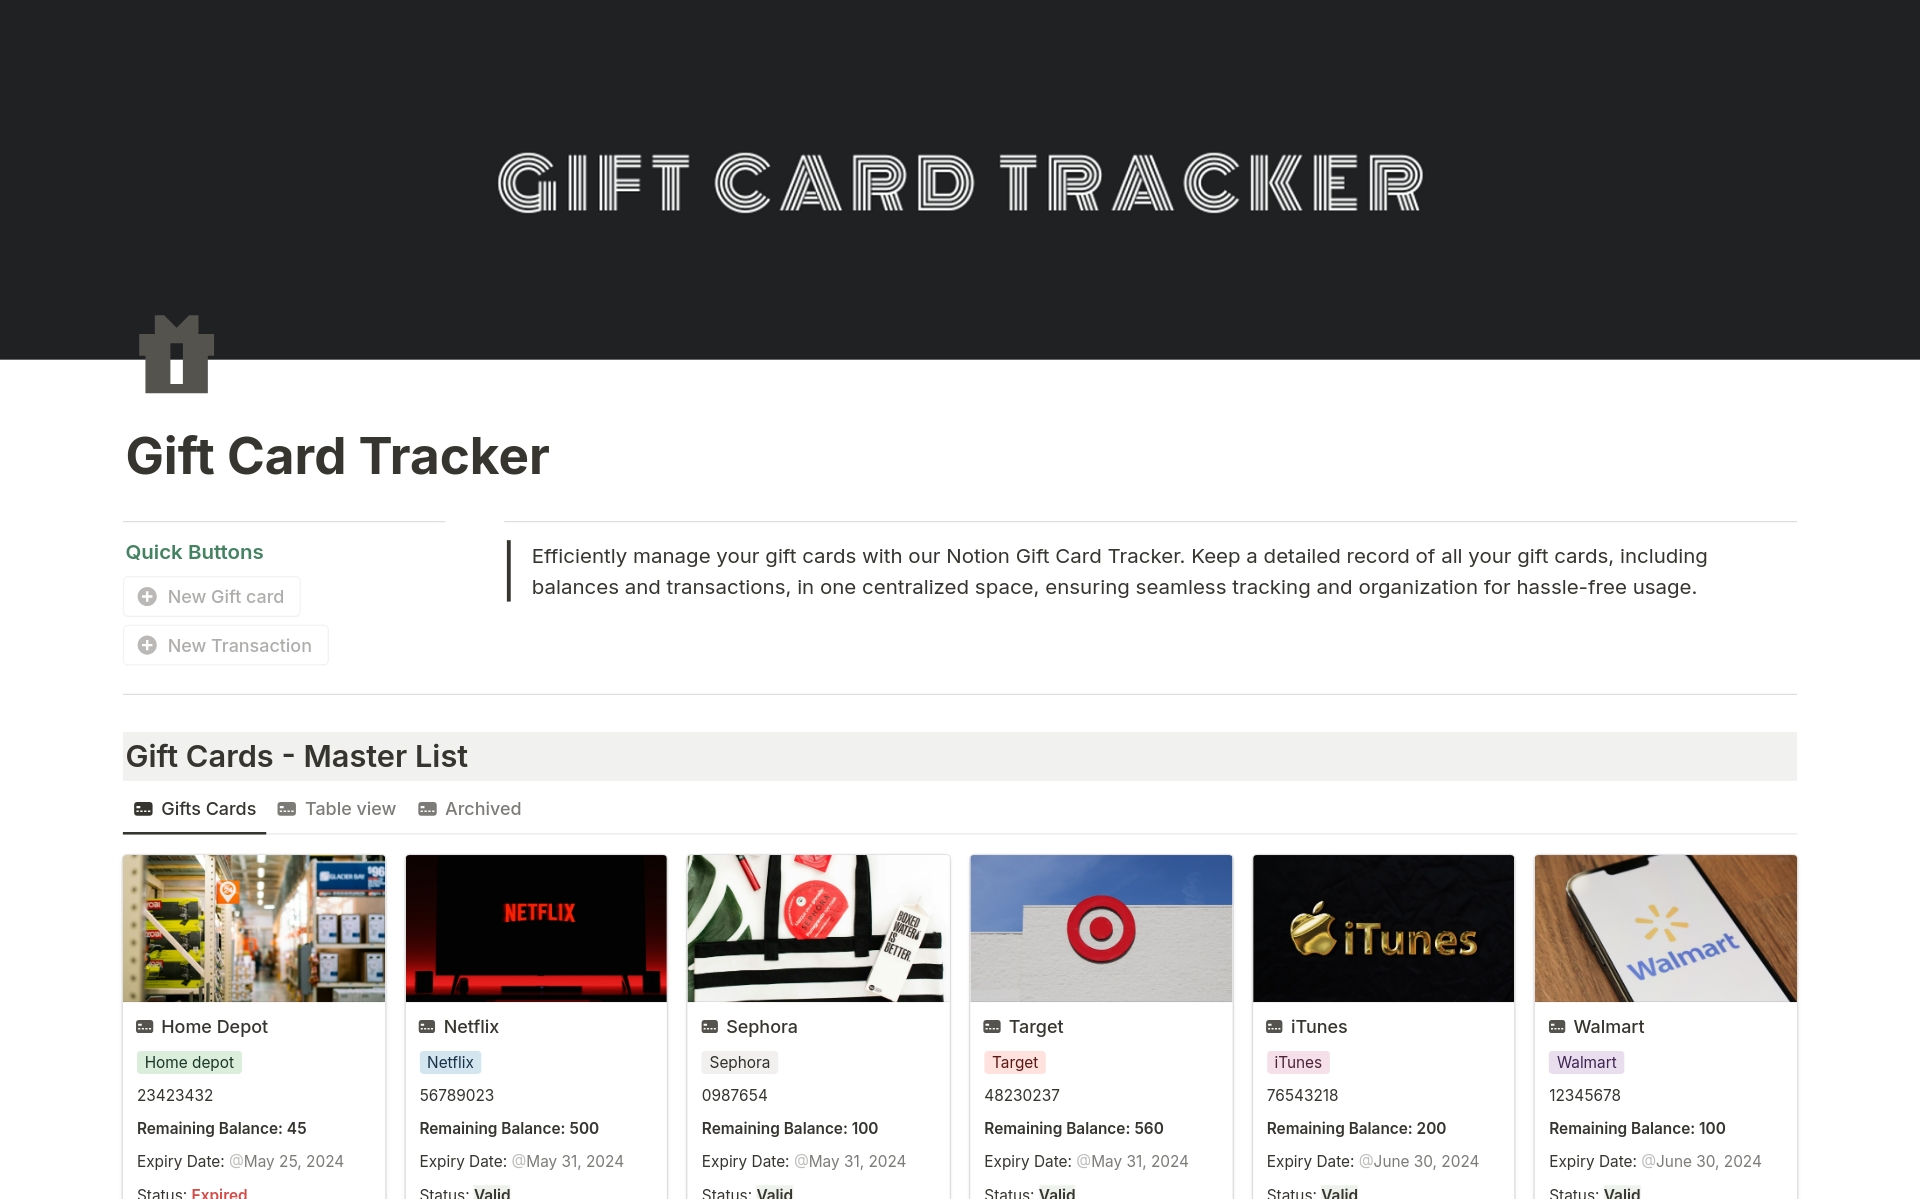 Efficiently manage your gift cards with our Notion Gift Card Tracker.